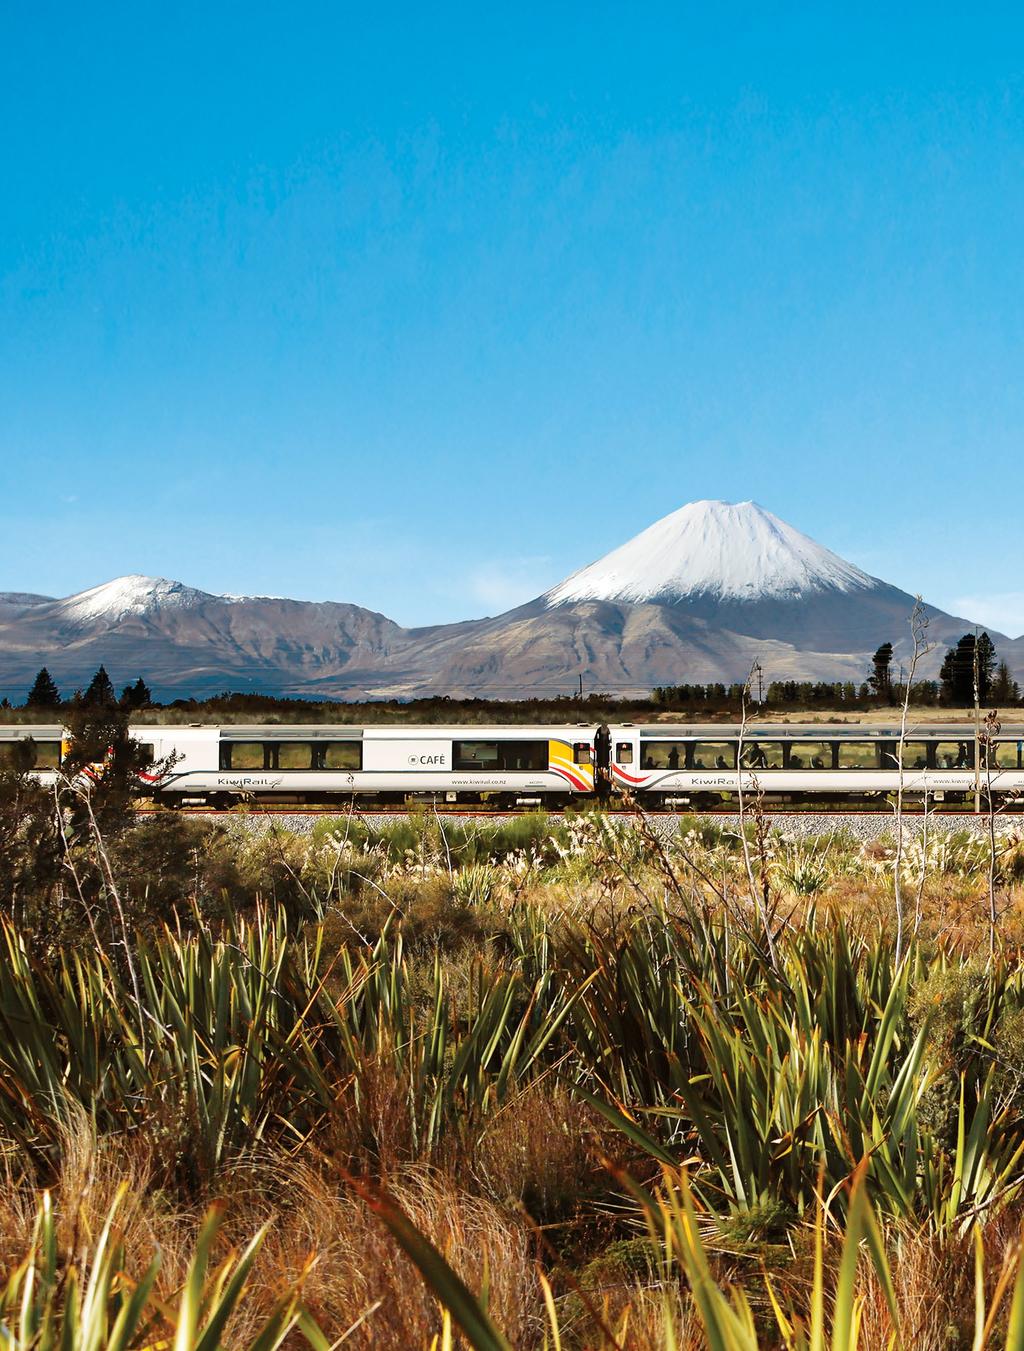 The Great New Zealand Train Journey Iconic train journey with wonderful scenery and musical experiences 13-27 OCTOBER 2019 Train whistle blowin, all aboard and we are on the road (or on the train